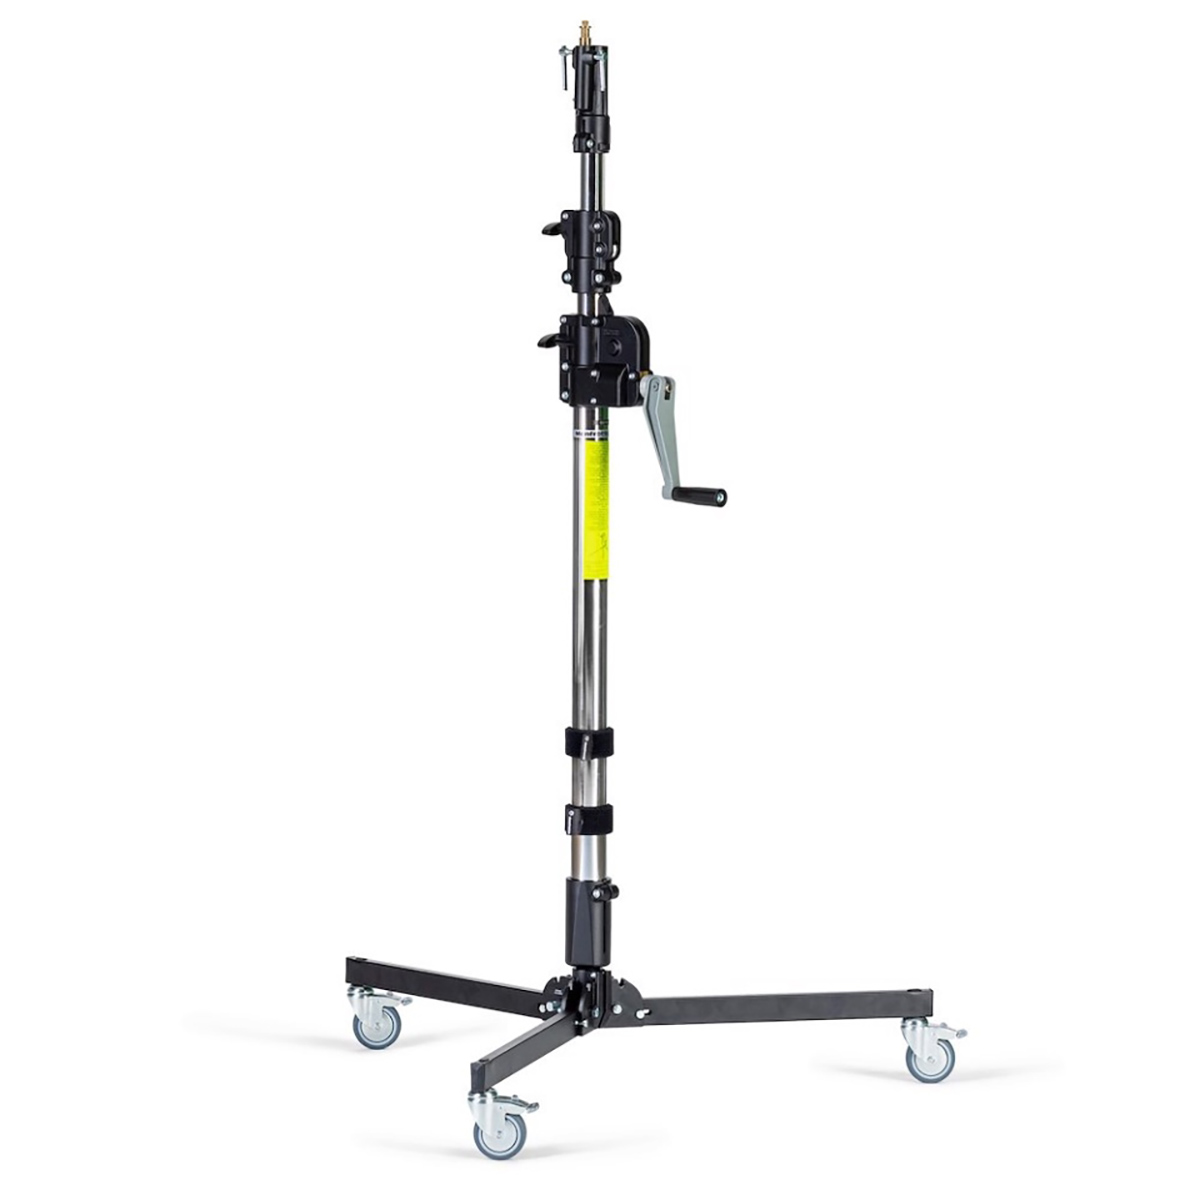 Manfrotto 087NWLB Wind-Up Bodenstativ 